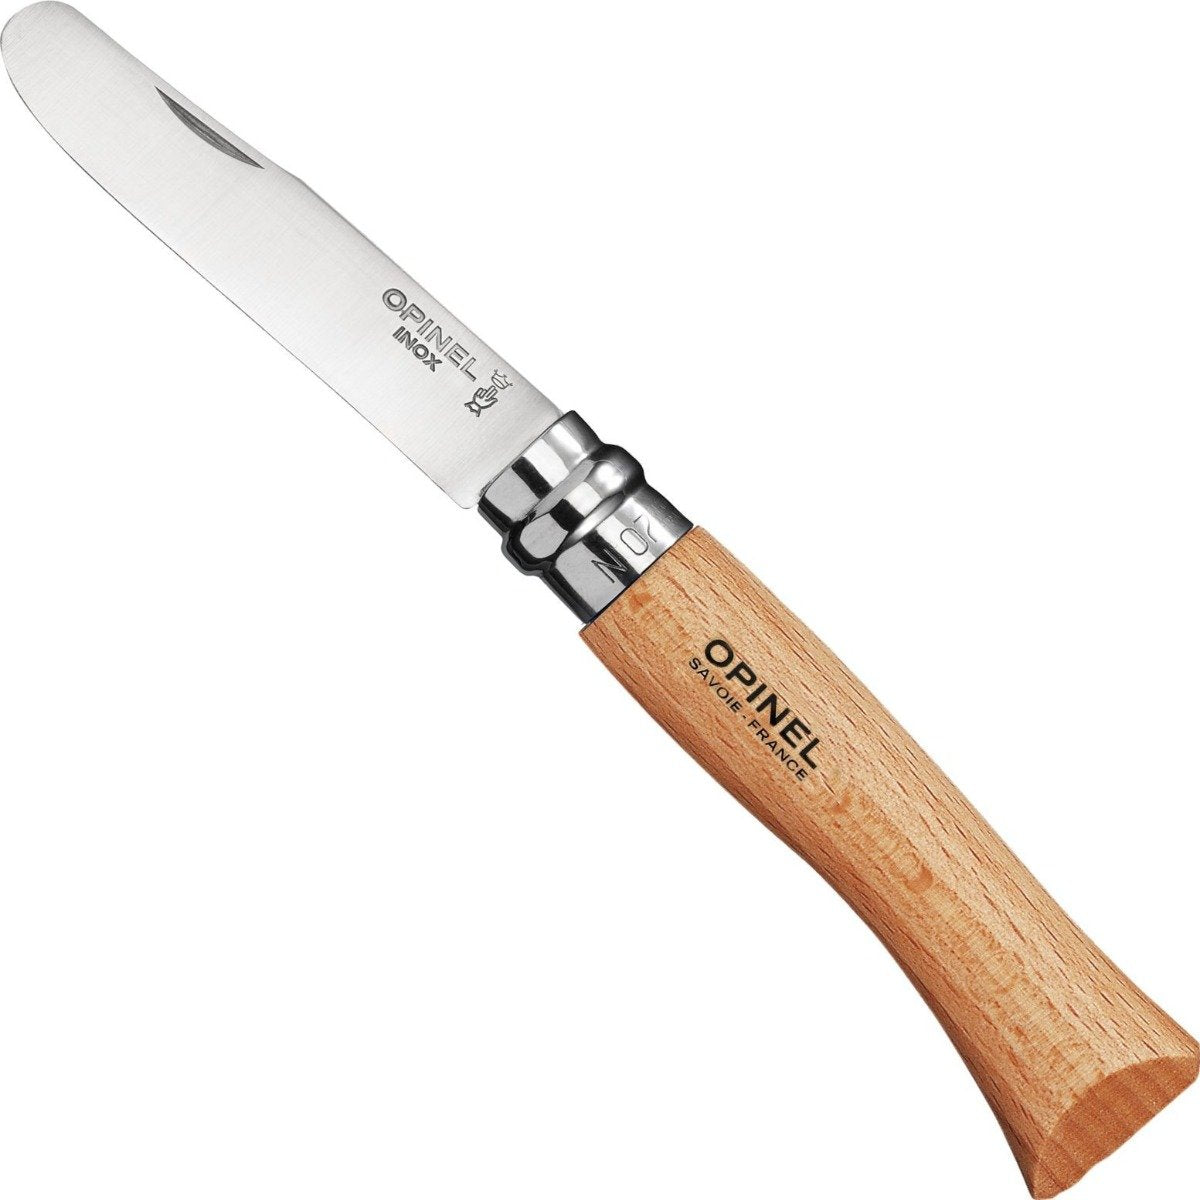 My First Opinel No.7 Stainless Steel Children’s Folding Knife with Safety Rounded Tip